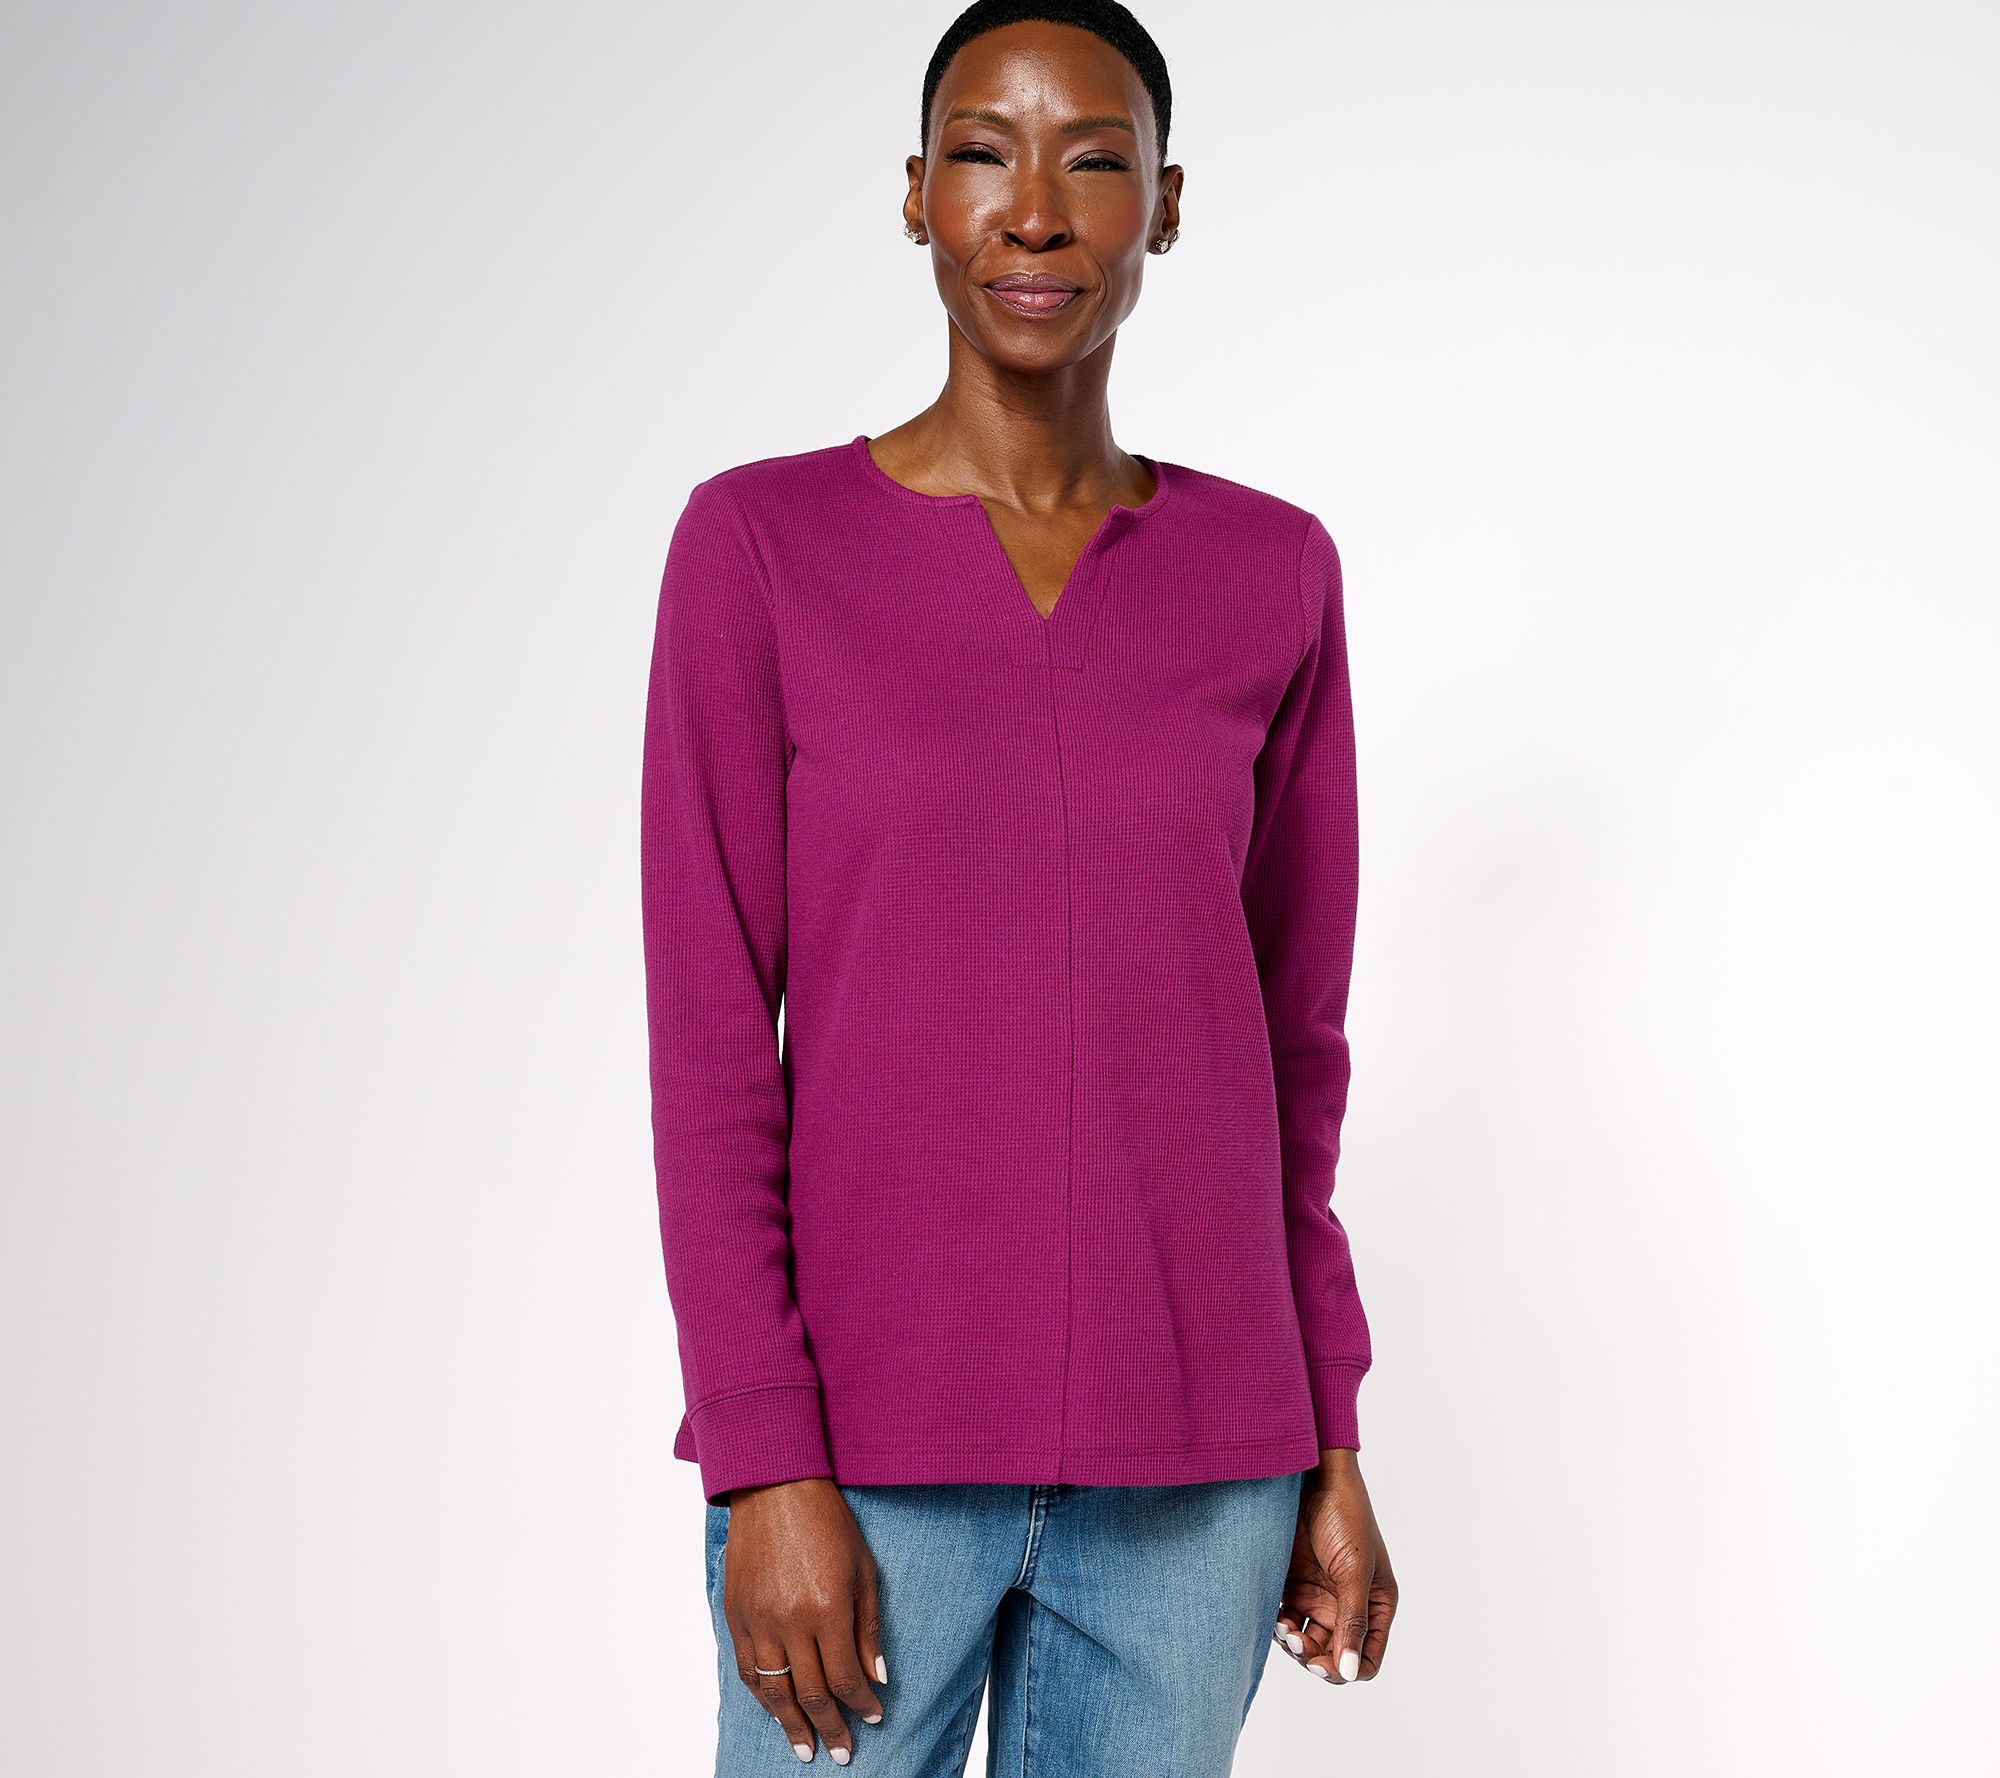  Pure Look Womens Long Sleeve Waffle Knit Stretch